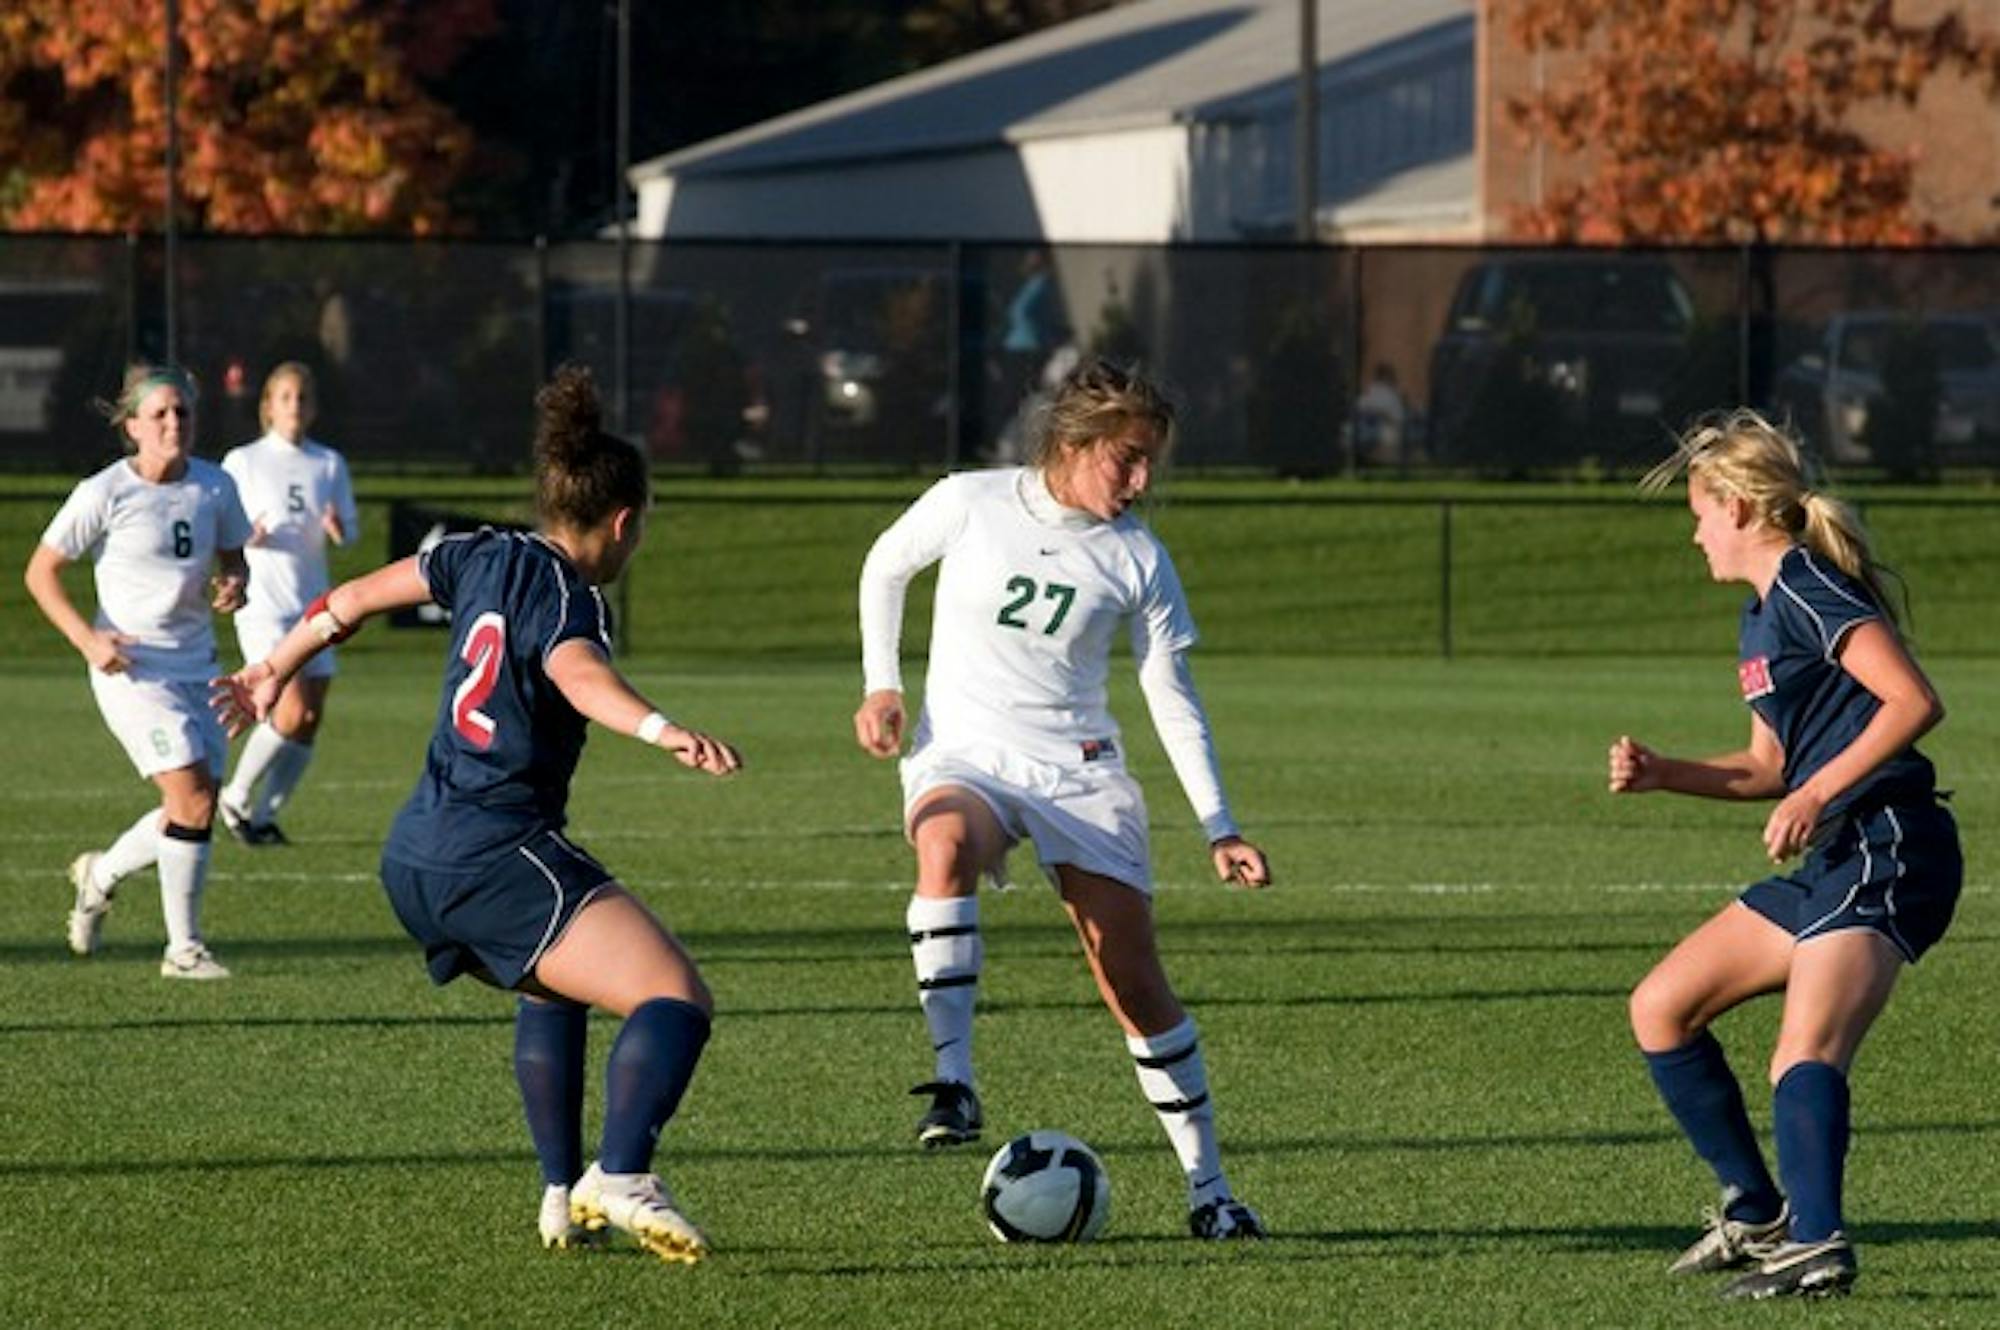 Midfielder Myra Sack '10 helped seal Dartmouth's victory over Penn on Saturday by scoring in the 84th minute to put the Big Green ahead, 2-0.